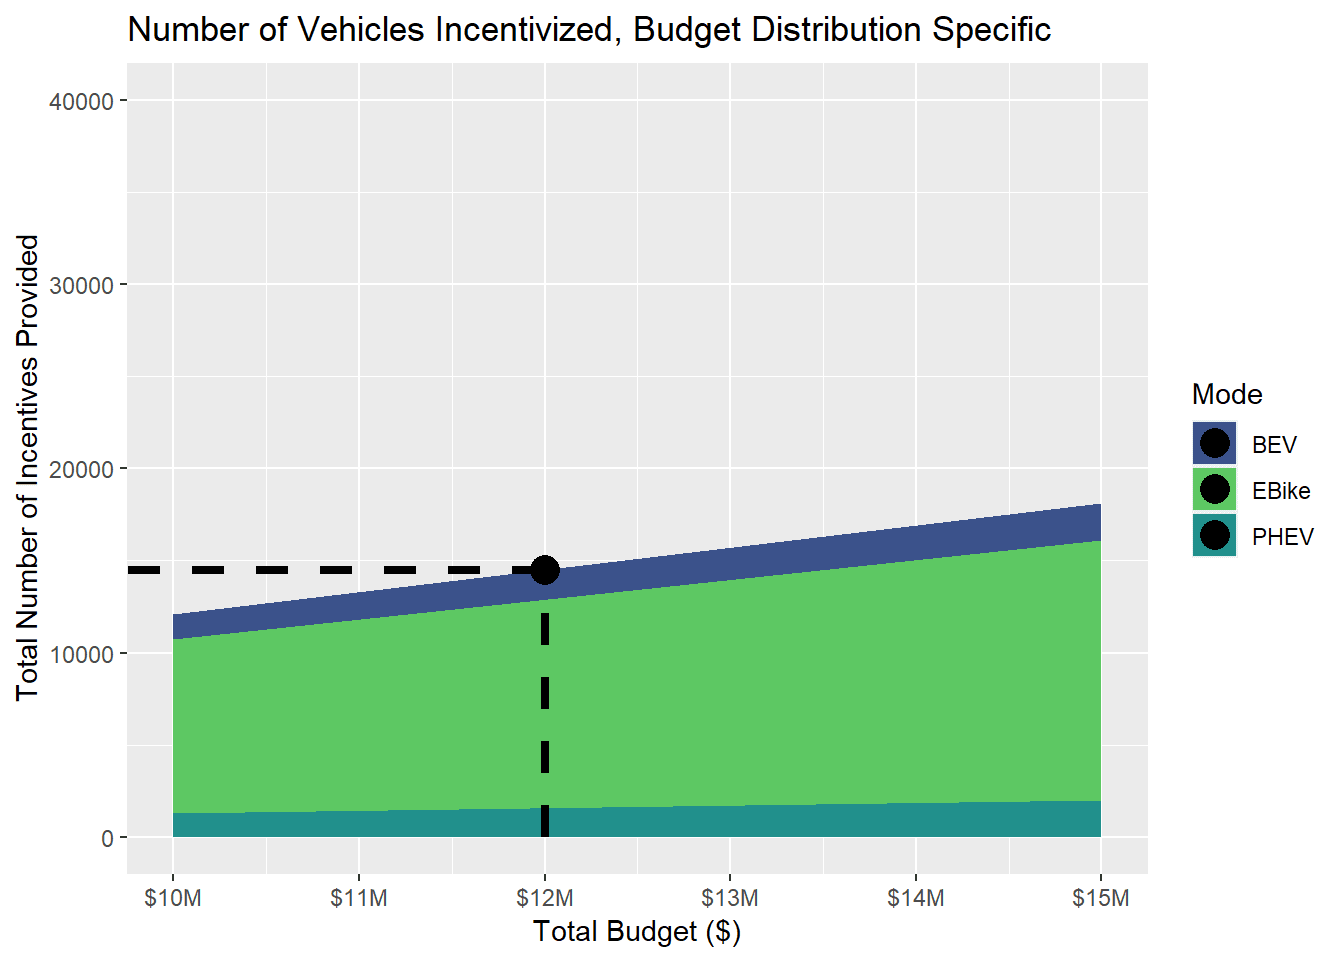 This plot displays the number of vehicles that can be incentivized given the total budget and distribution of the budget. With the proposed program, 11314 e-bikes, 1584 battery electric vehicles, and 1584 plug-in hybrid electric vehicles can be incentiviz